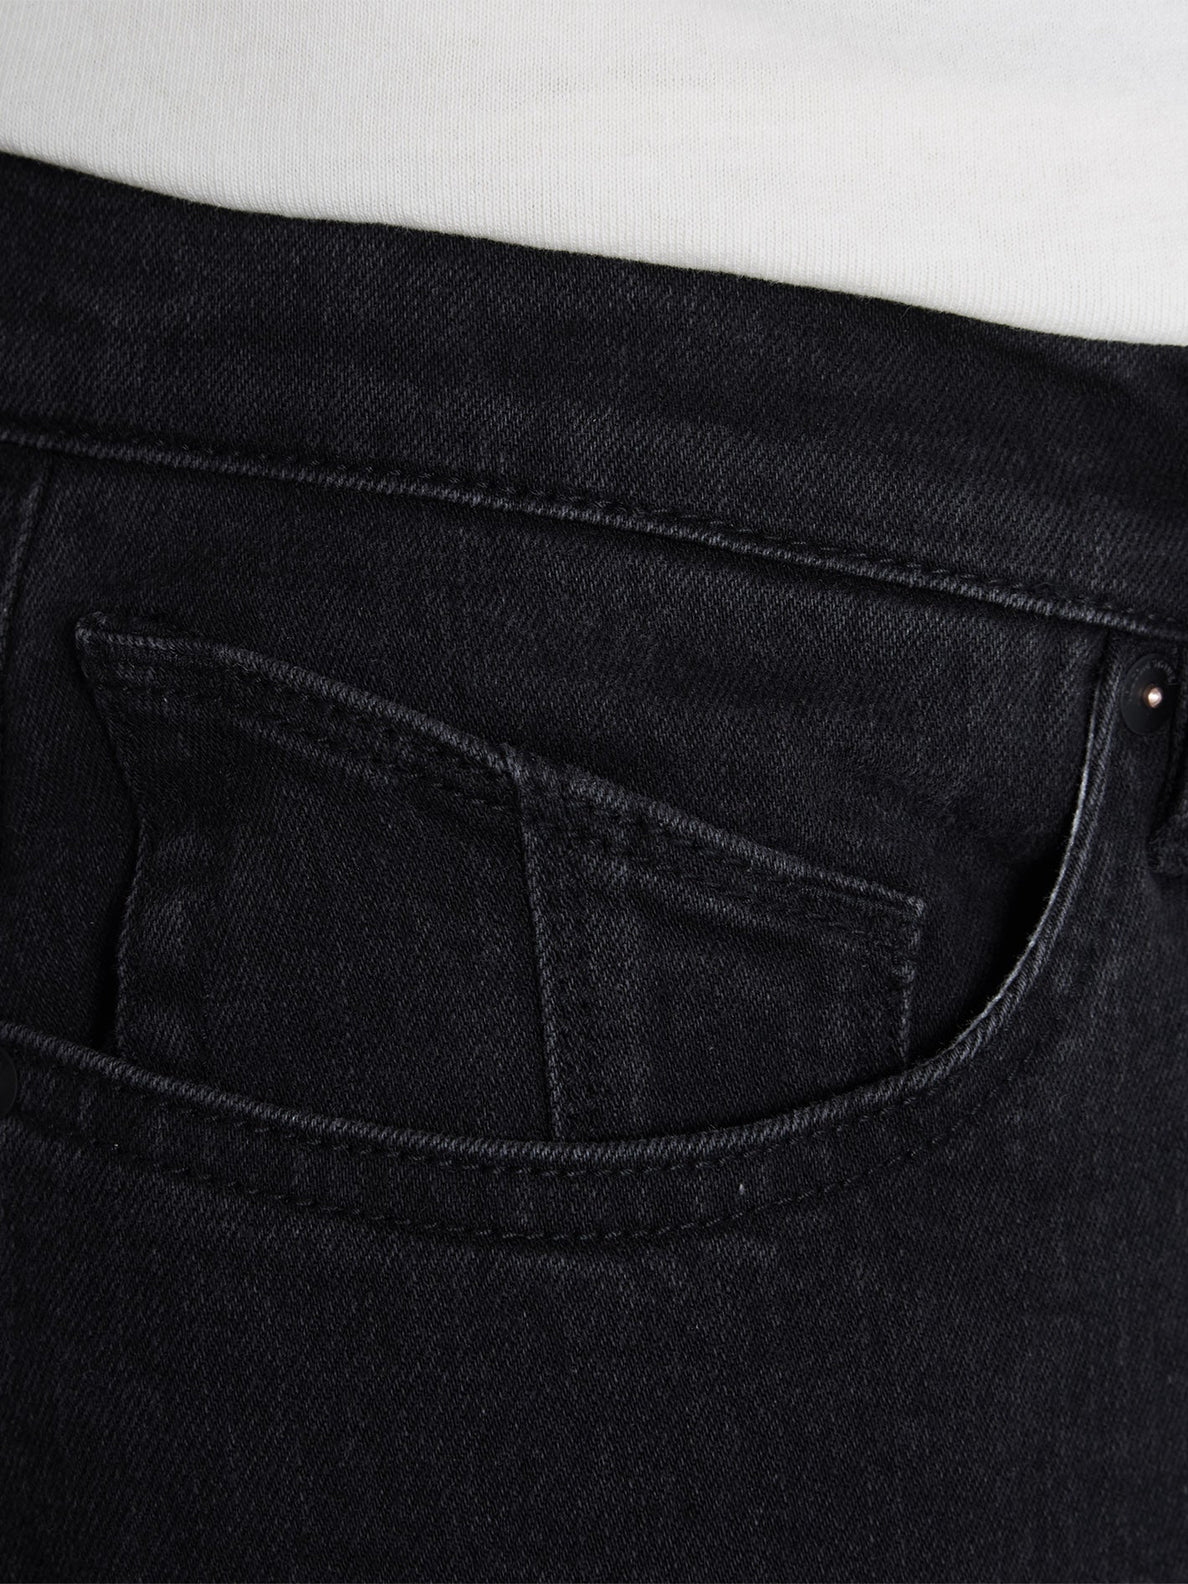 Solver Jeans - BLACK OUT (A1912303_BKO) [2]